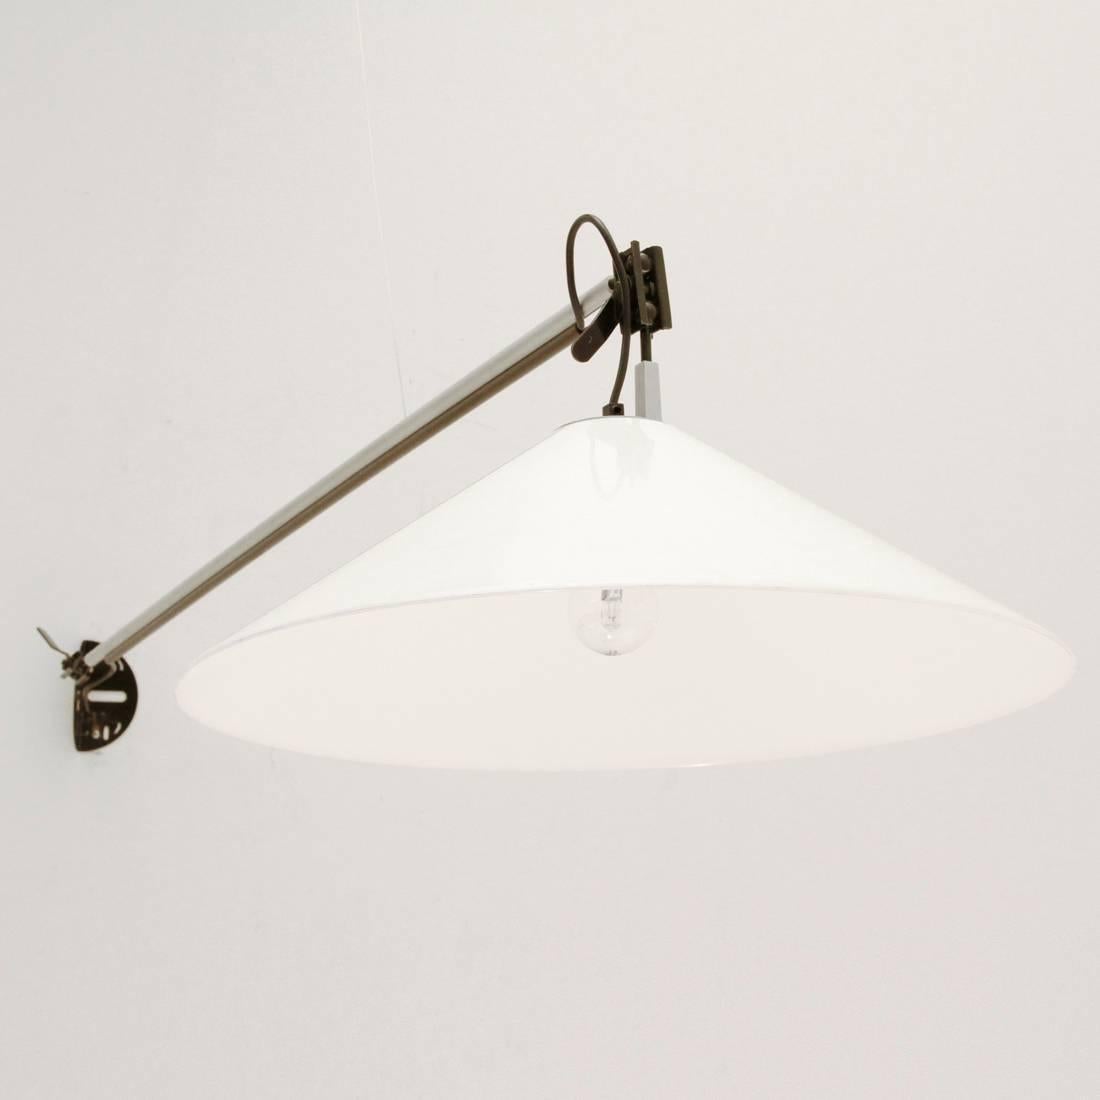 This light was designed in 1974 by Enzo Mari for Artemide. It is made from black metal and aluminium with a conical diffuser in white methacrylate. It can be mounted on either the ceiling or a wall.